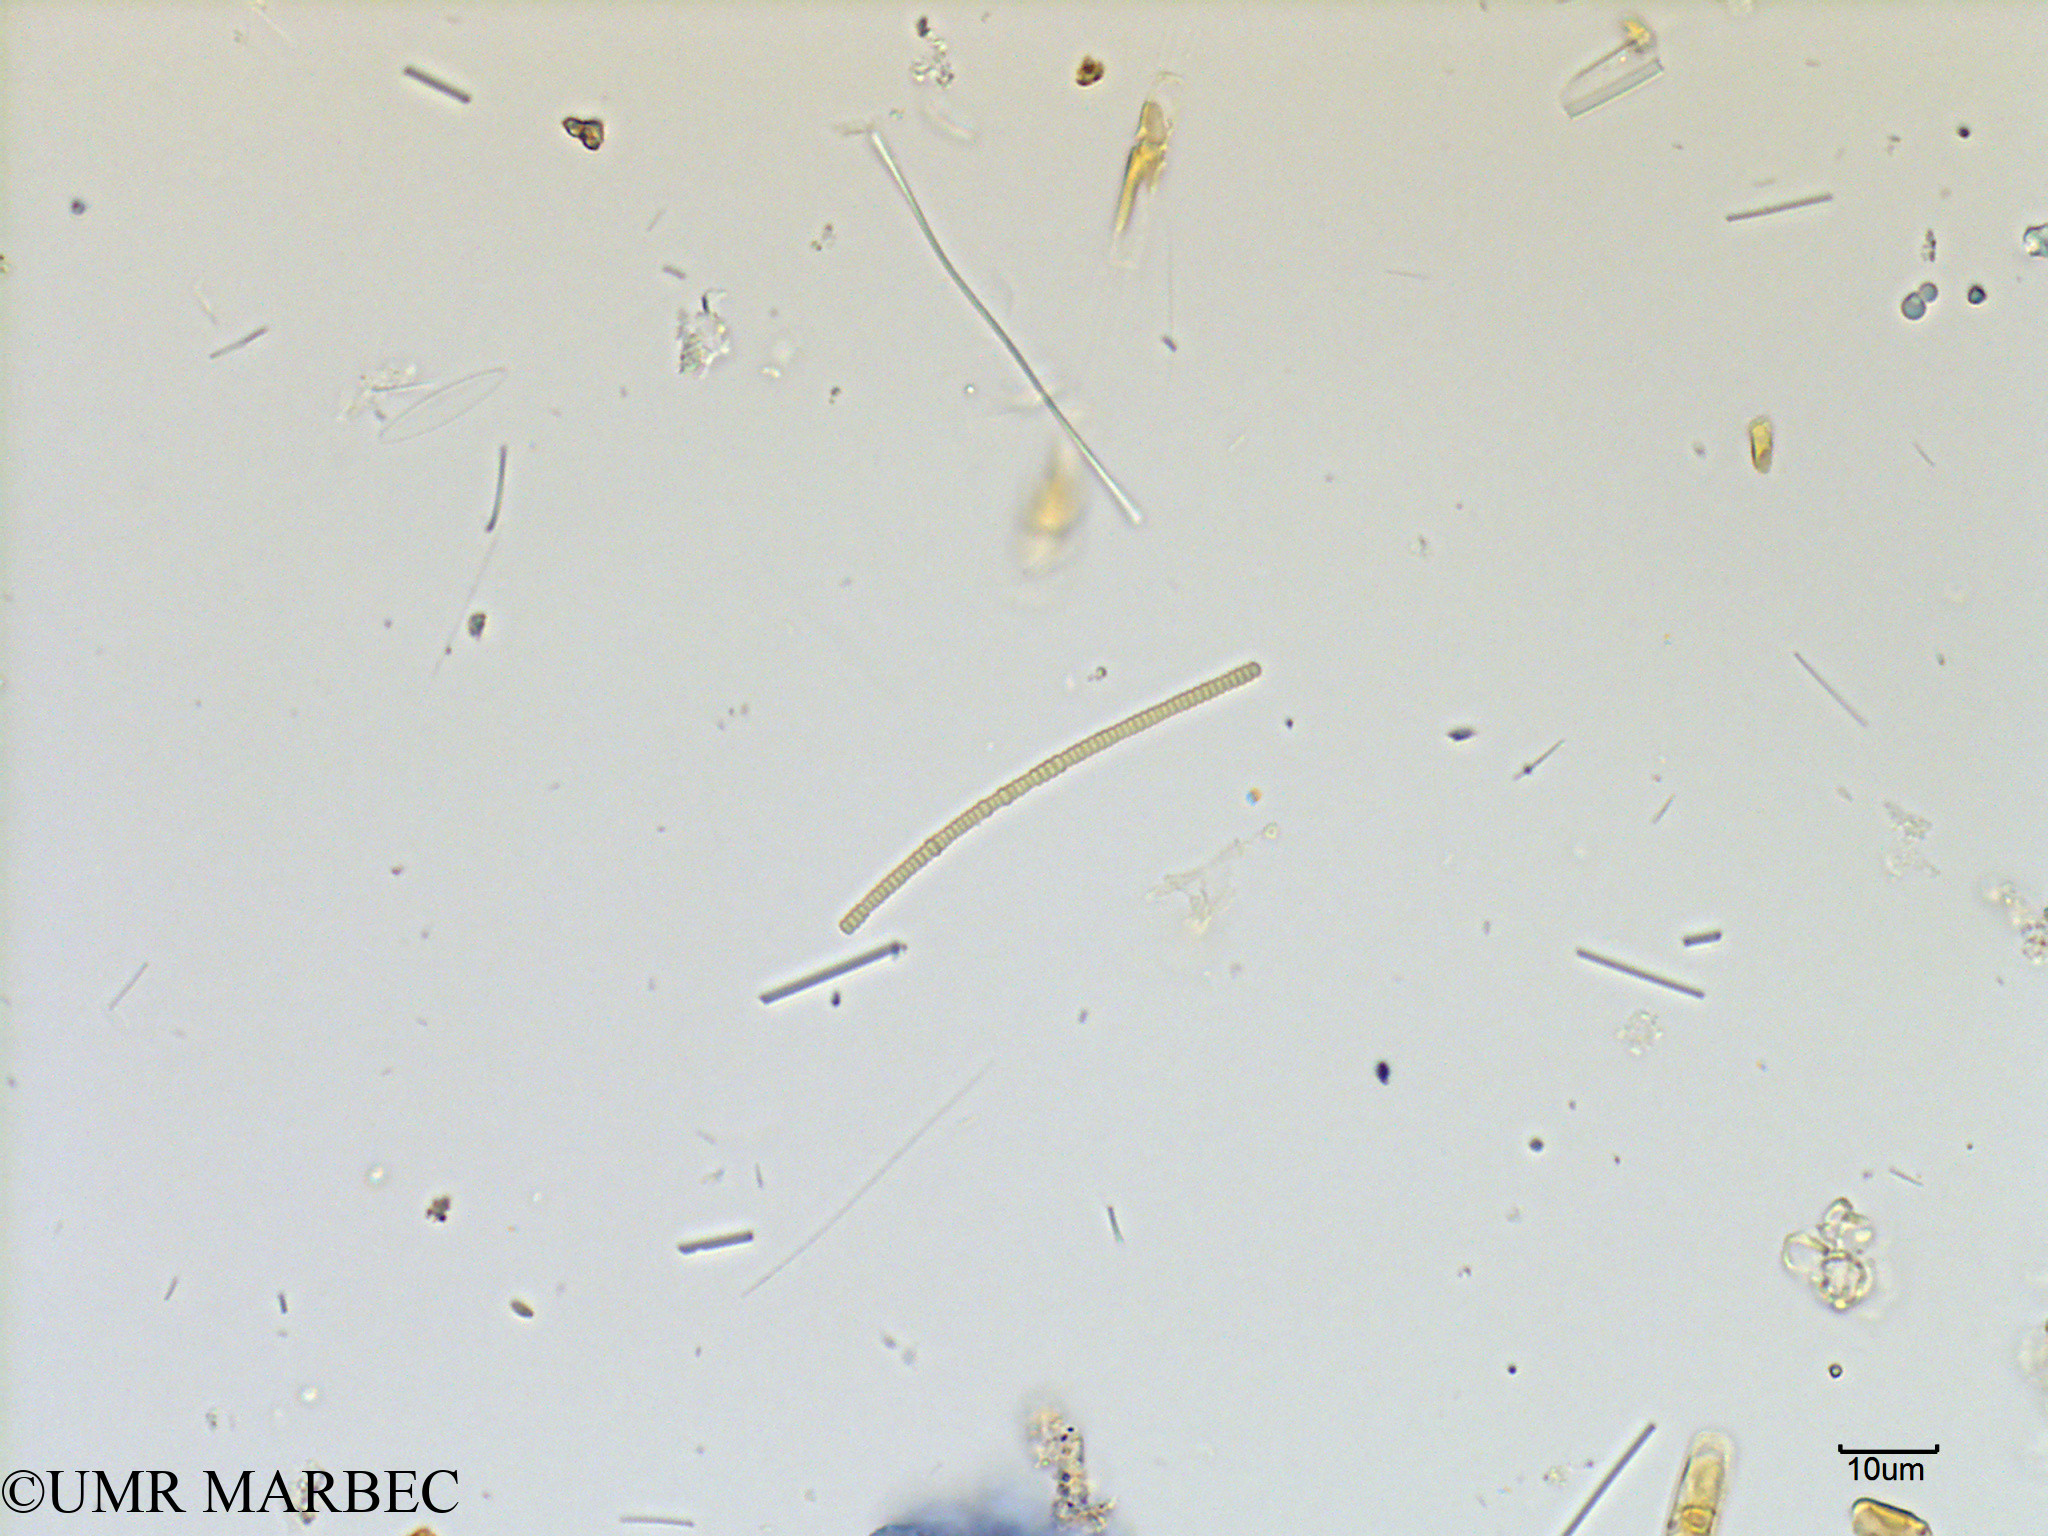 phyto/Scattered_Islands/mayotte_lagoon/SIREME May 2016/Oscillatoriale spp (MAY7_cyano petite2).tif(copy).jpg